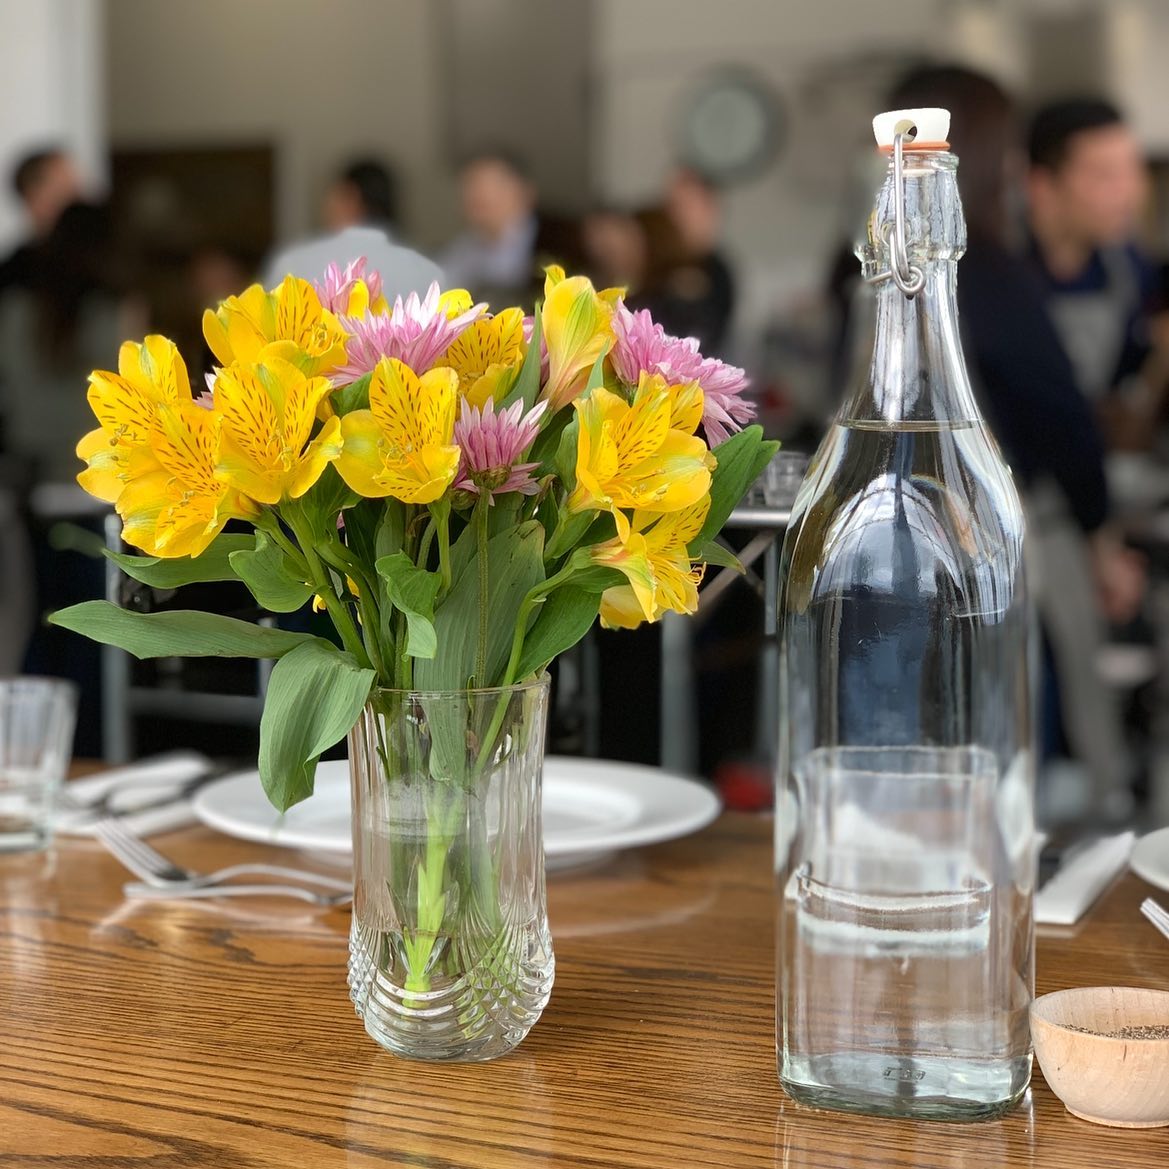 Spring menus are fresh and ready to launch in the HOG kitchen this week! We are so excited to have a steadily buzzing kitchen again. Come cook with us! Email tellmemore@handsongourmet.com to book your event.